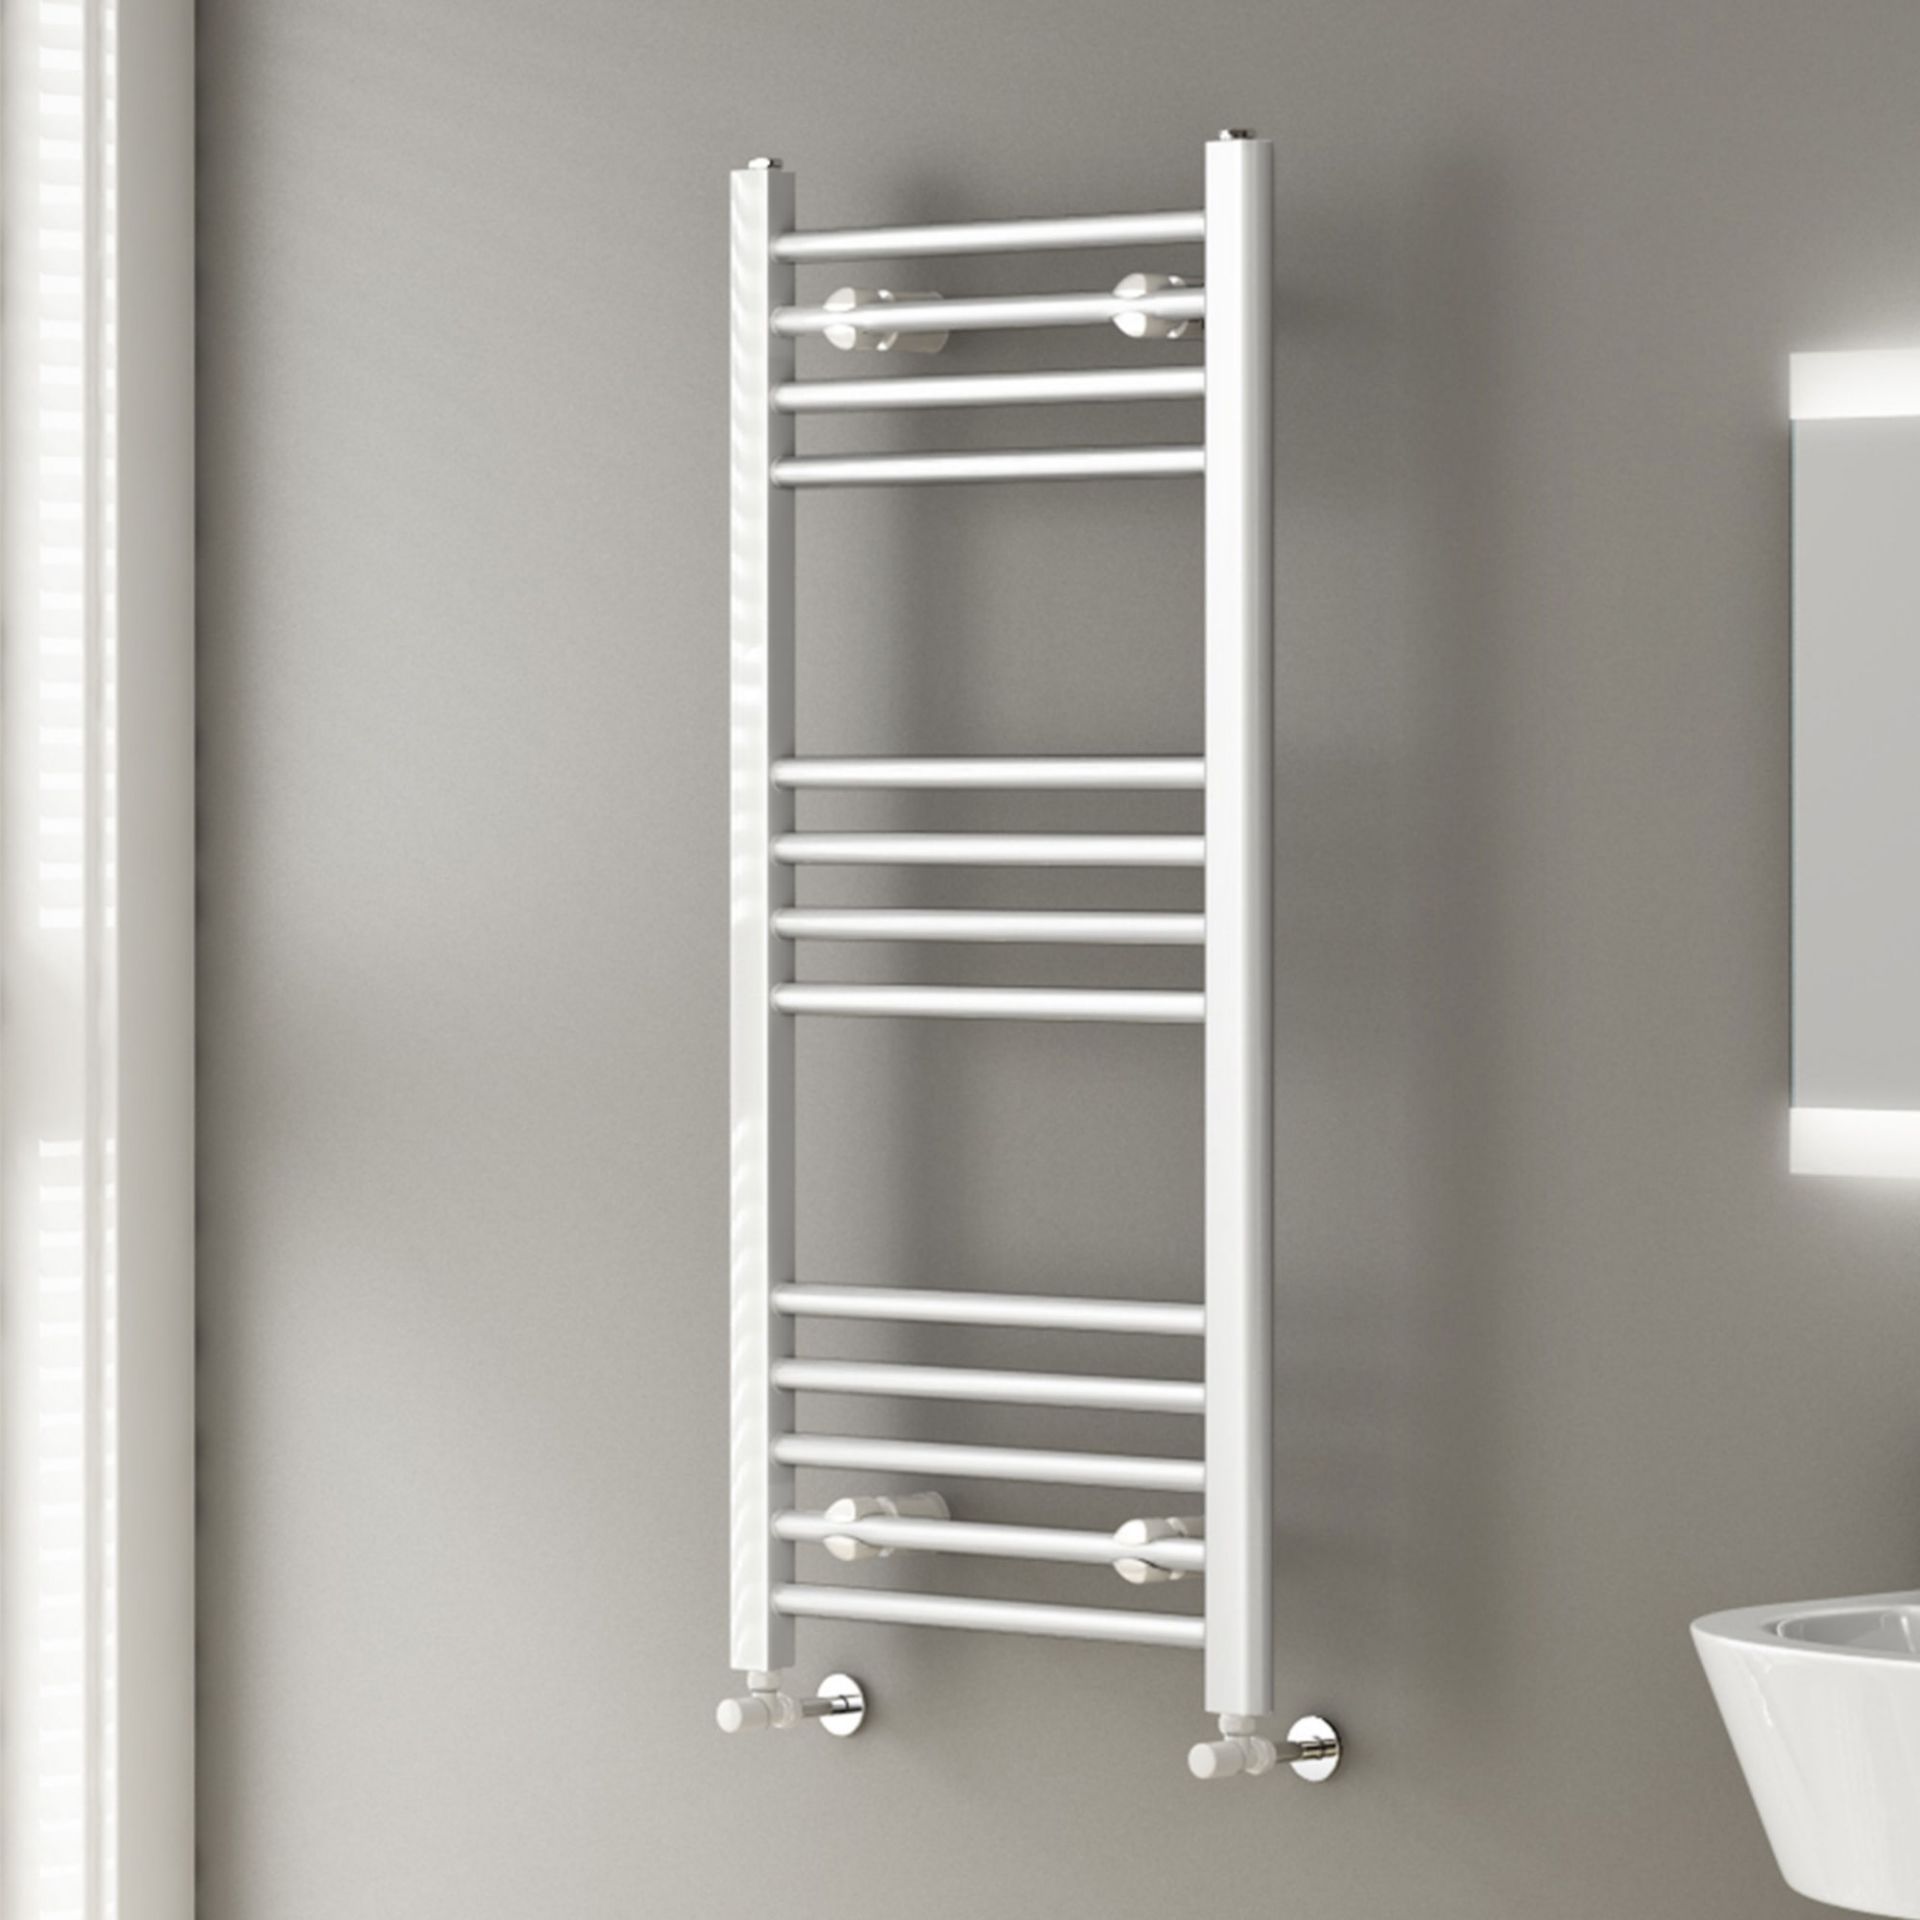 (JM154) 1000x450mm White Straight Rail Ladder Towel Radiator. Made from low carbon steel Finished